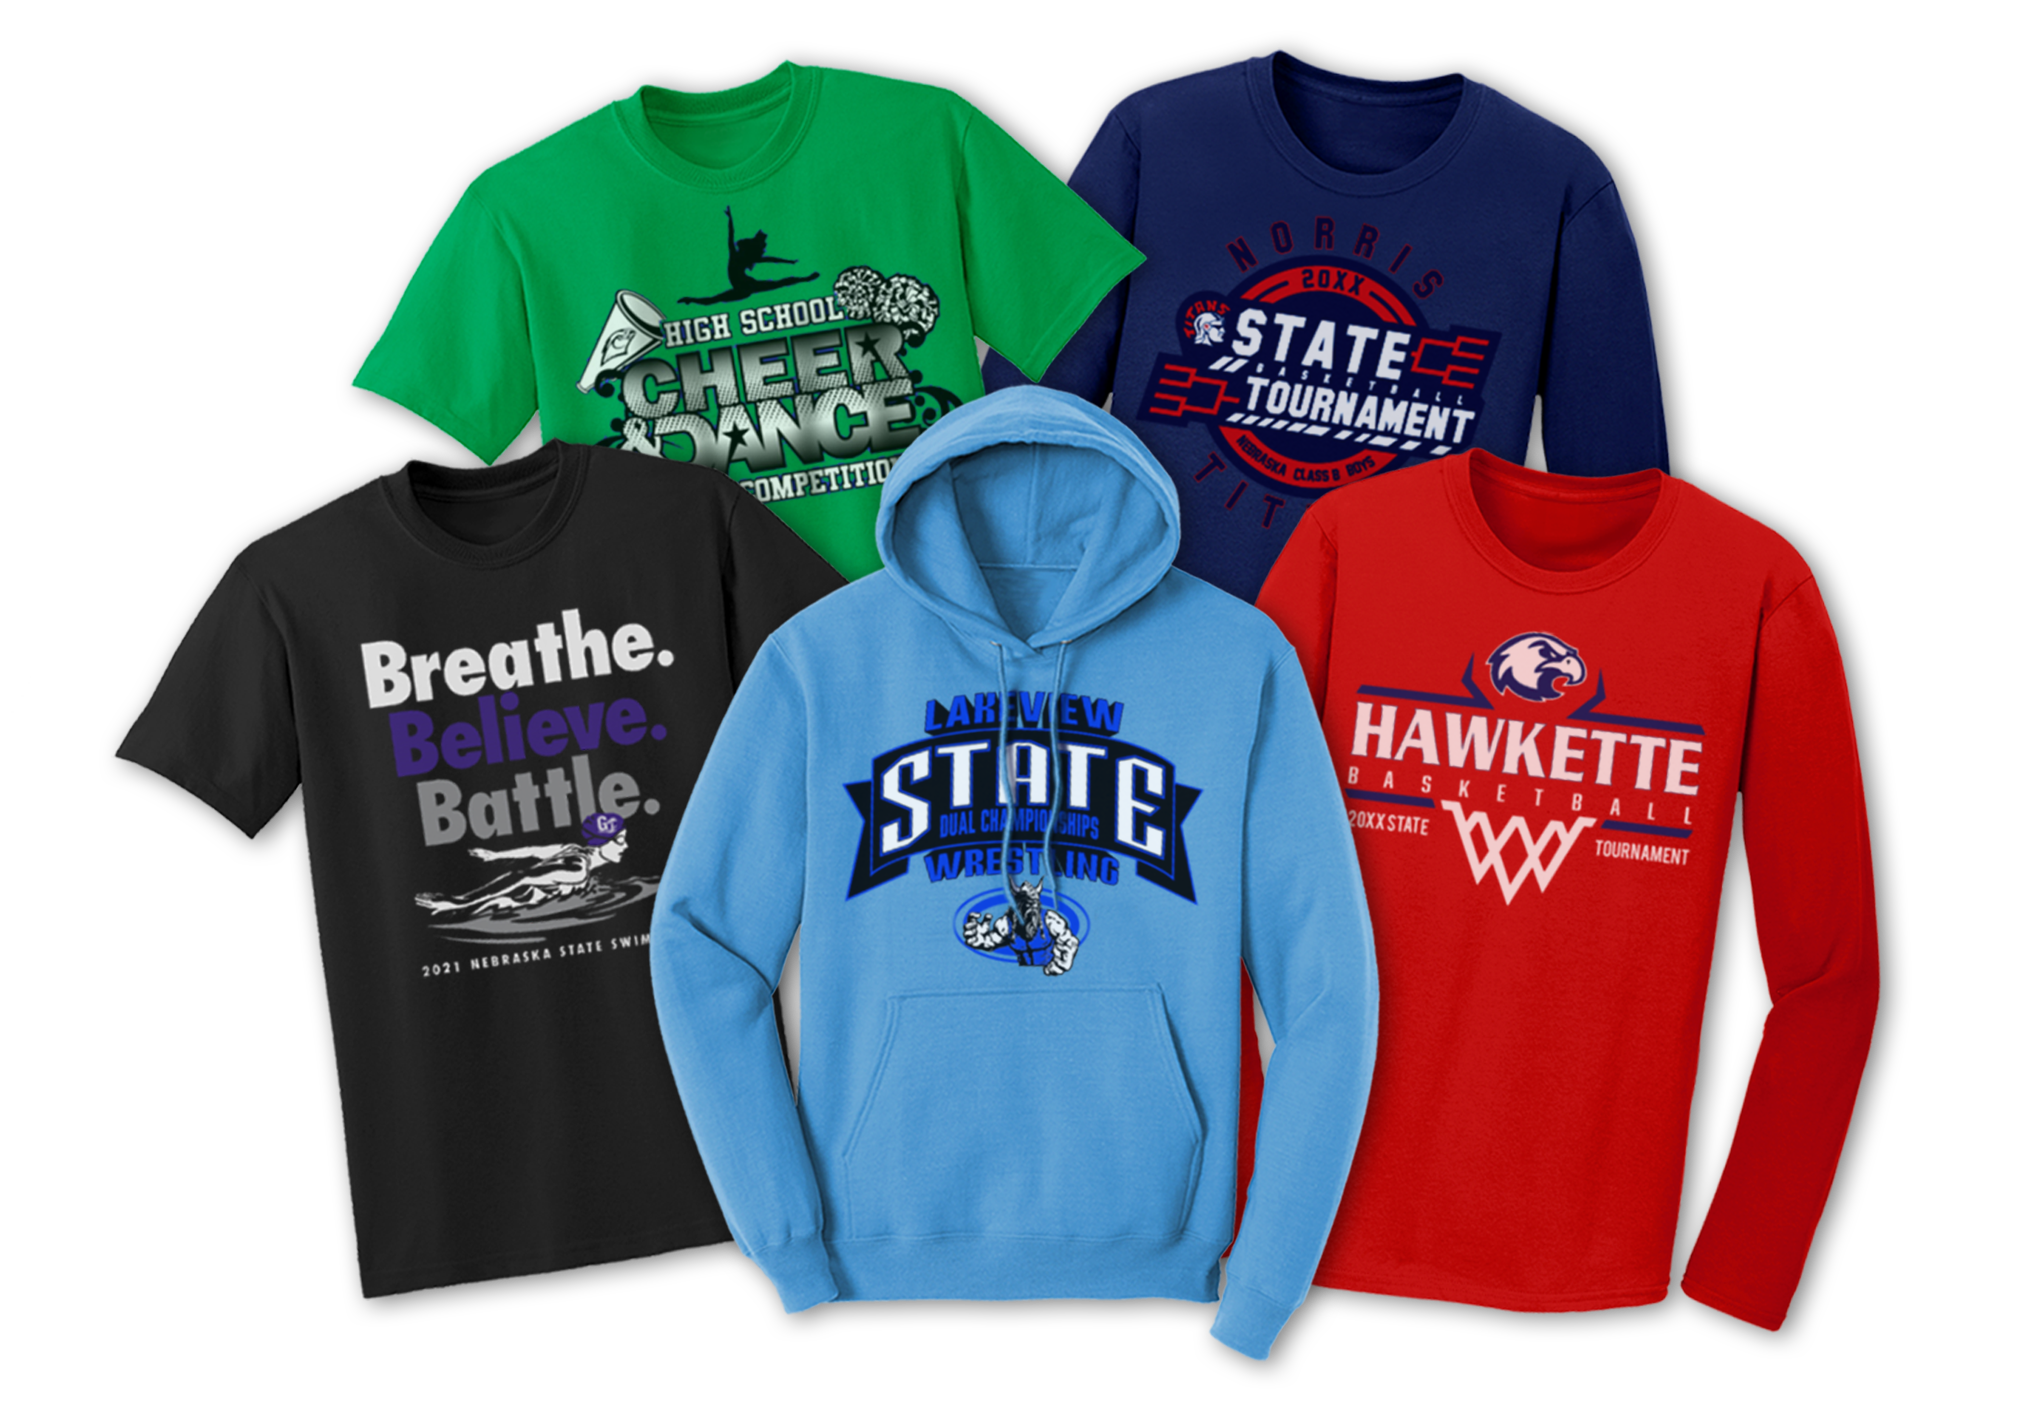 Screen printed t-shirts with state tournament custom designs.